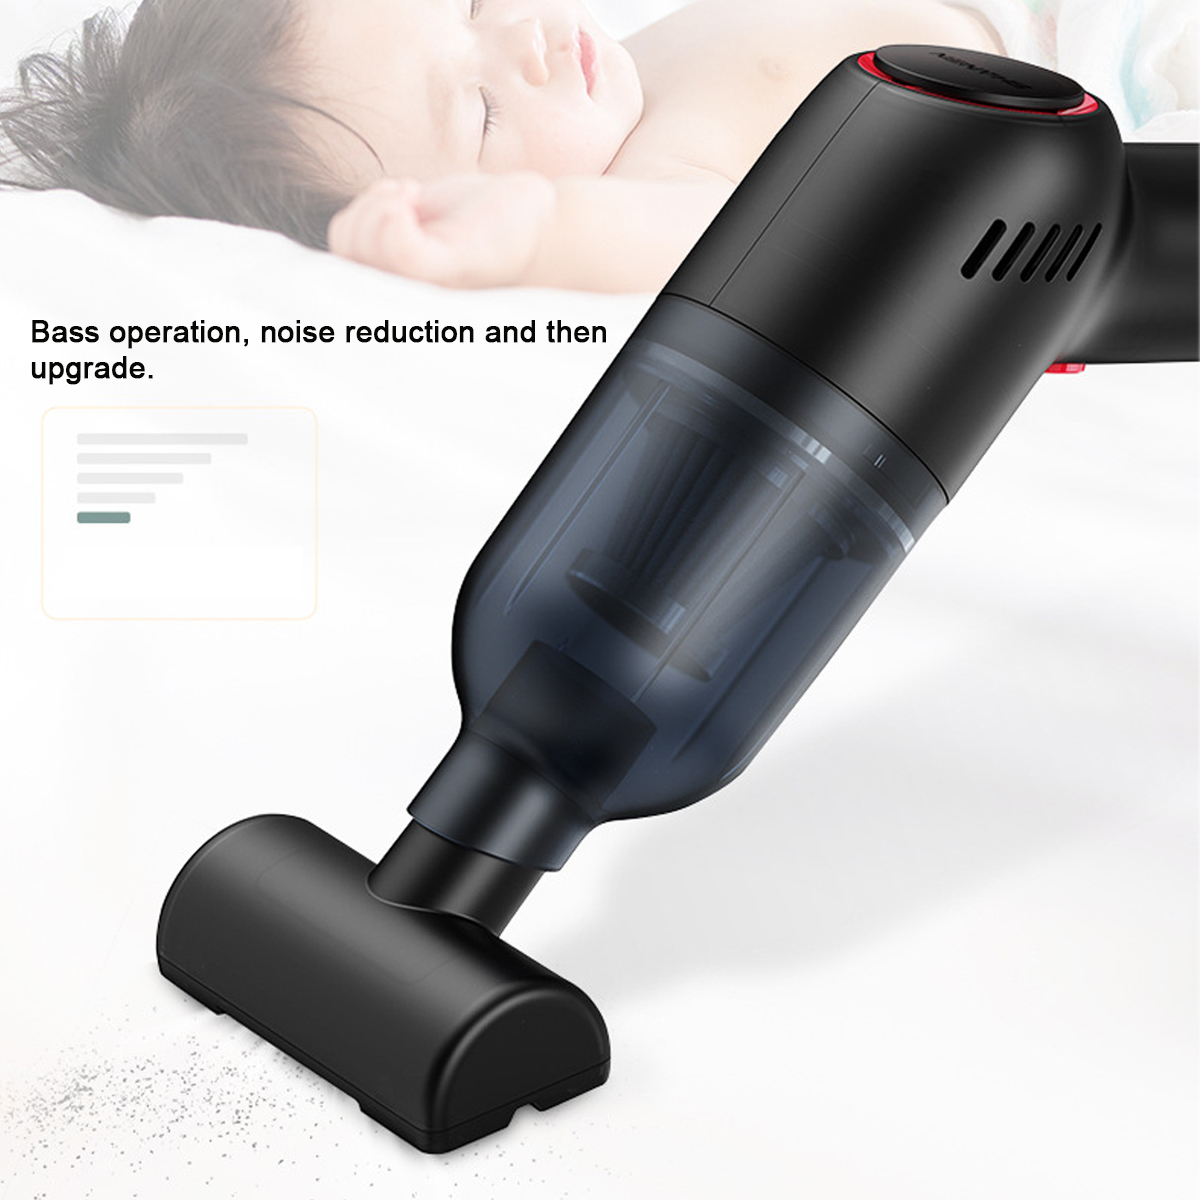 8000Pa-120W-Car-Vacuum-Cleaner-Suction-Cordless-Handheld-USB-Rechargeable-Portable-Car-Household-Vac-1888646-3